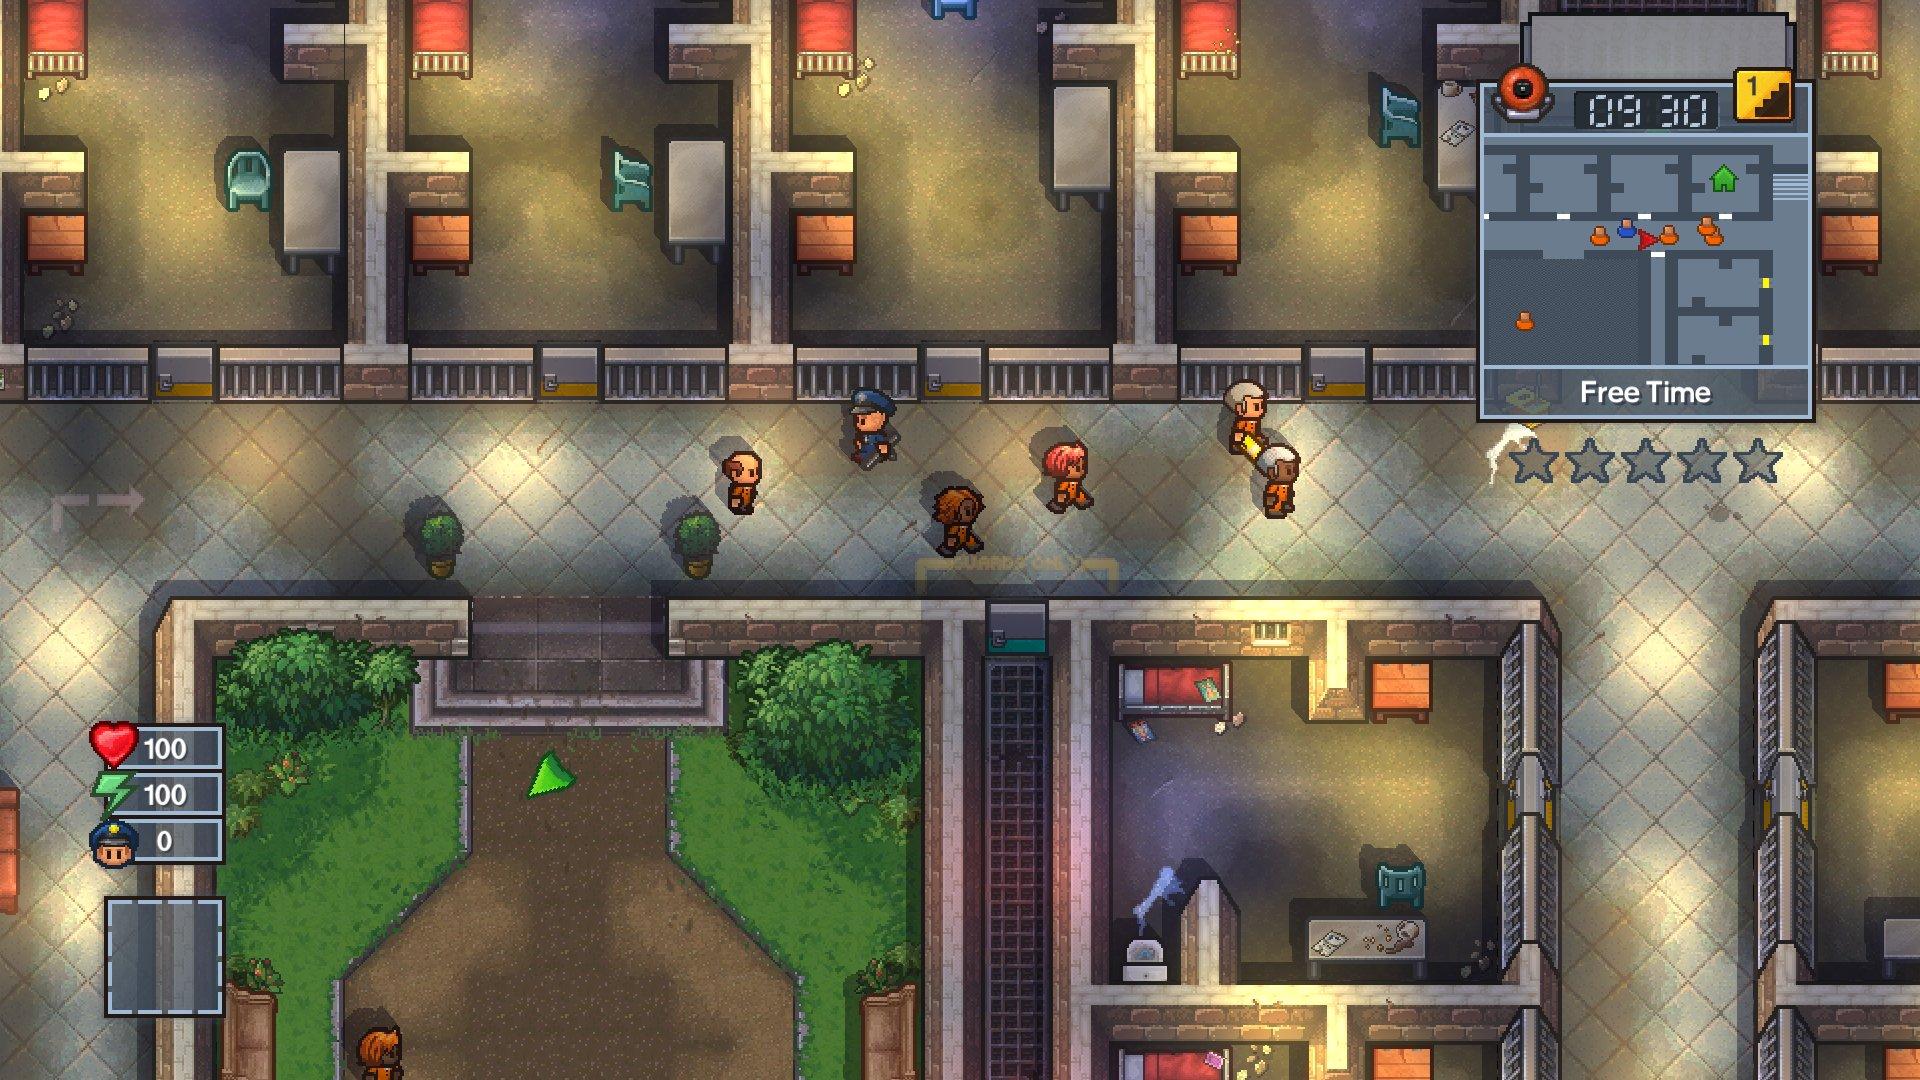 New details emerge for The Escapists 2 on Xbox One